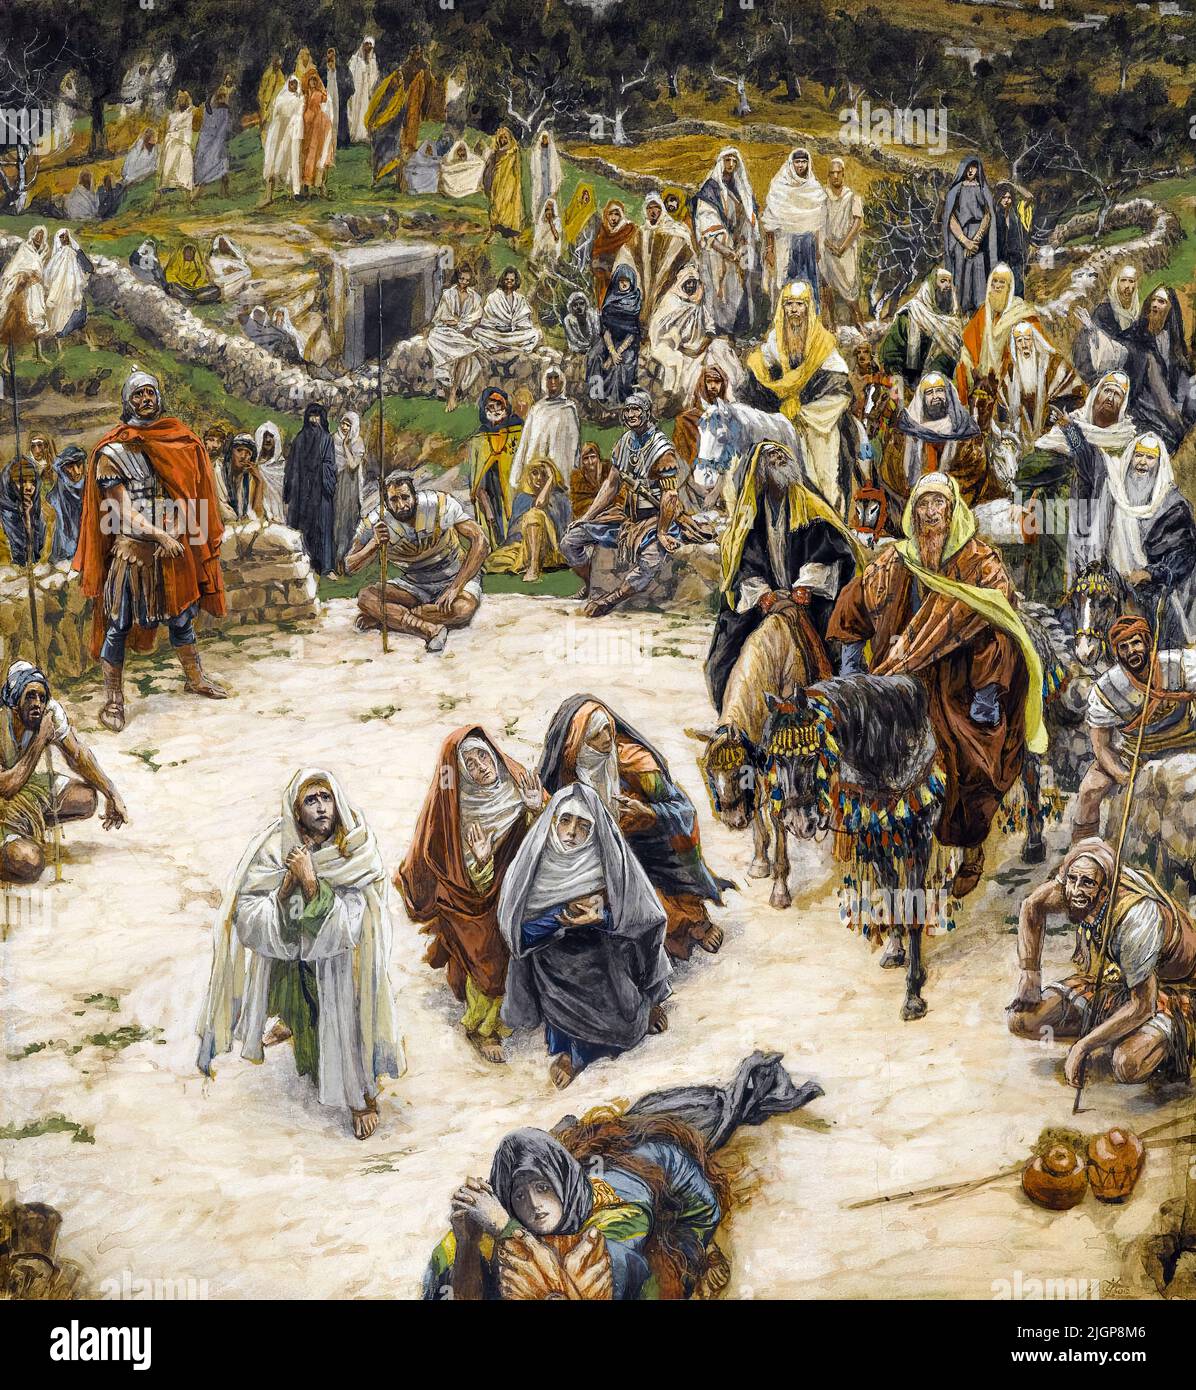 James Tissot, What Our Lord Saw from the Cross, watercolour painting, 1886-1894 Stock Photo